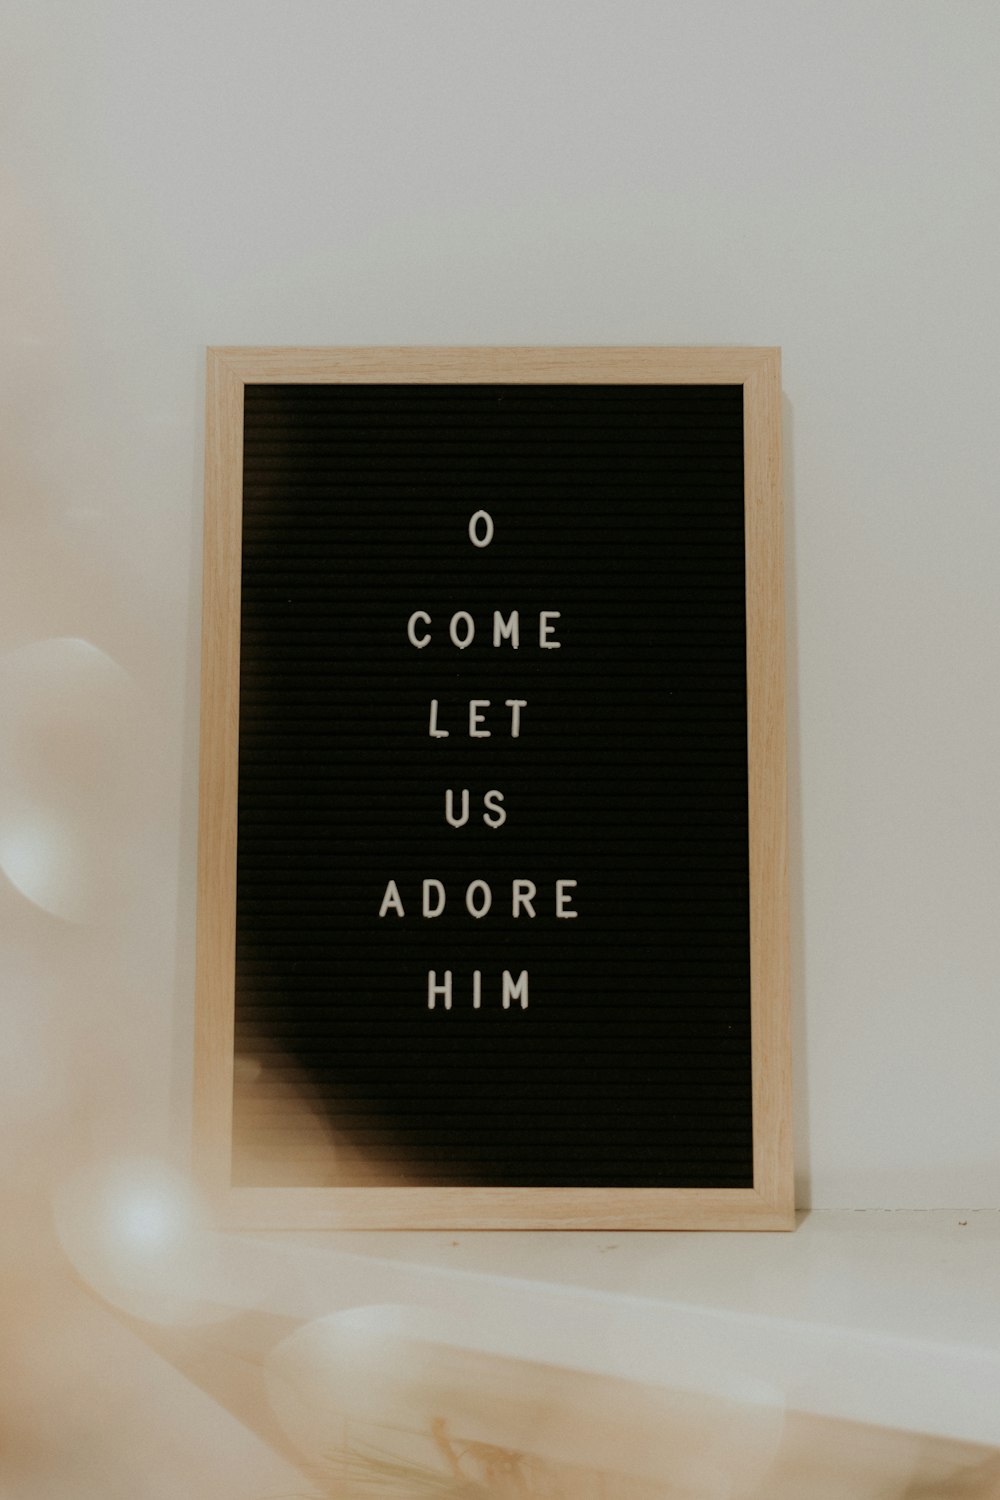 a black and white sign that says o come let us adore him